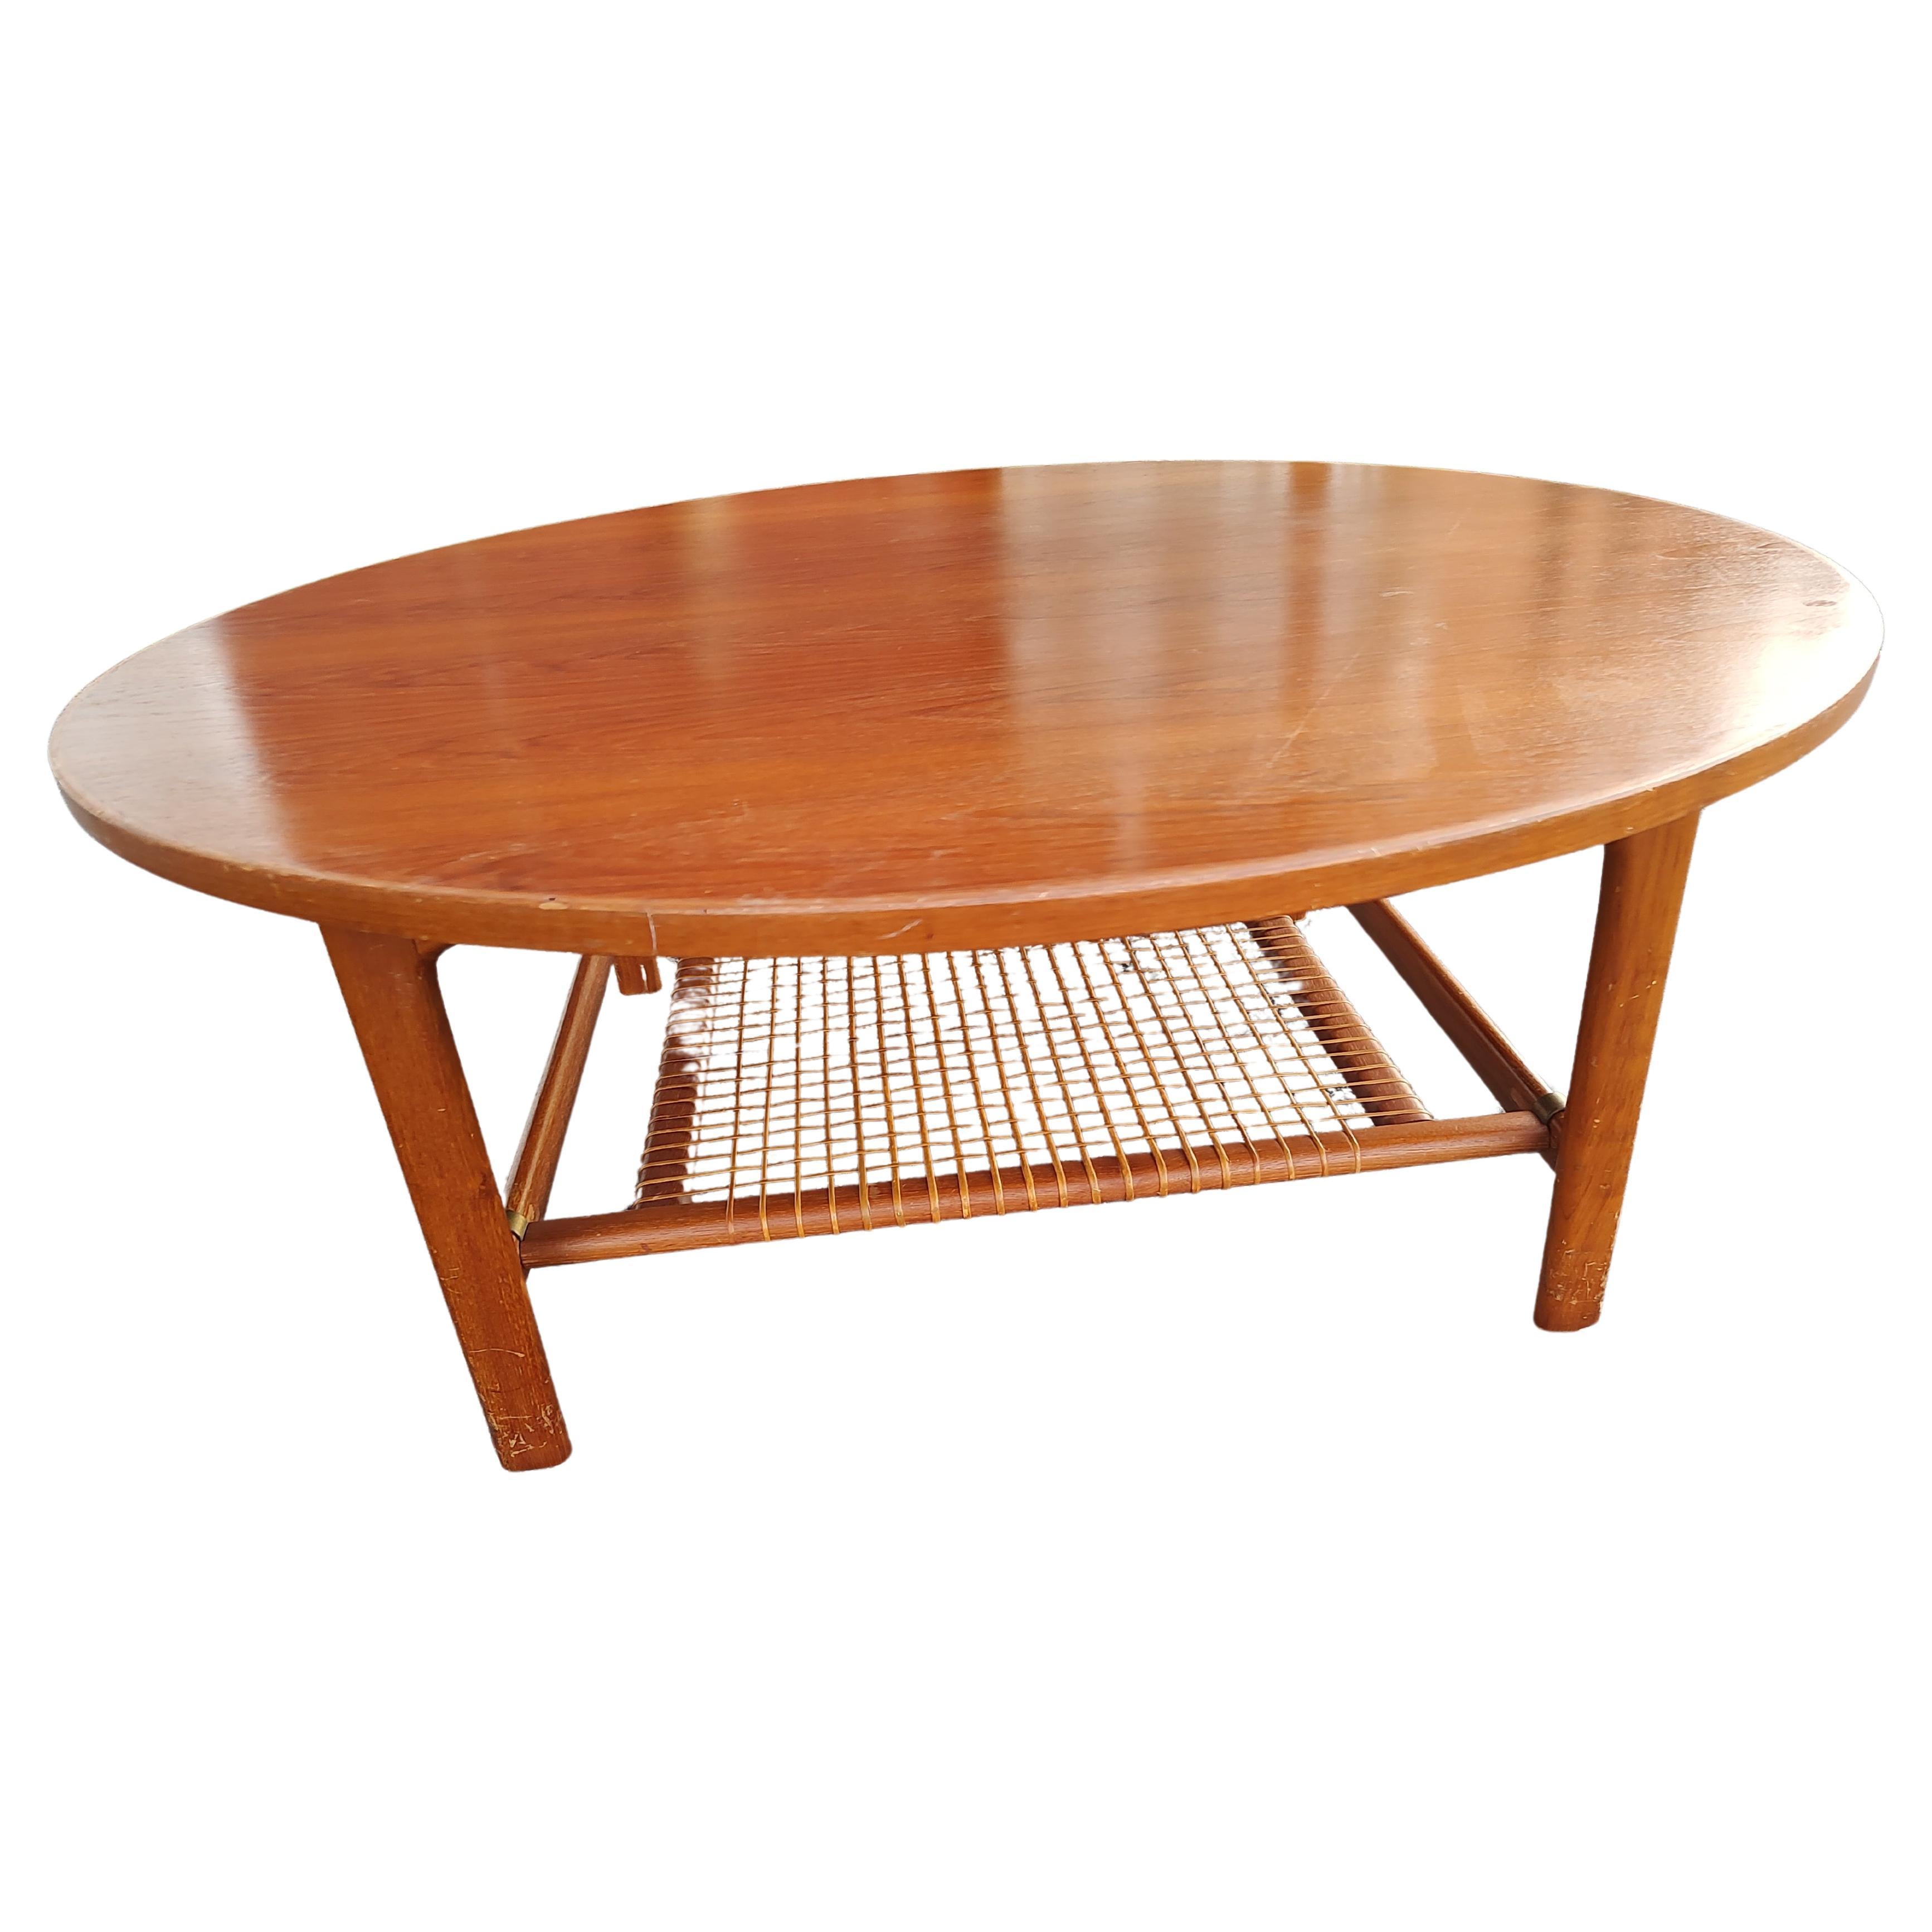 Mid-Century Modern Teak with Woven Shelf Cocktail Table by Dux Sweden - Restored For Sale